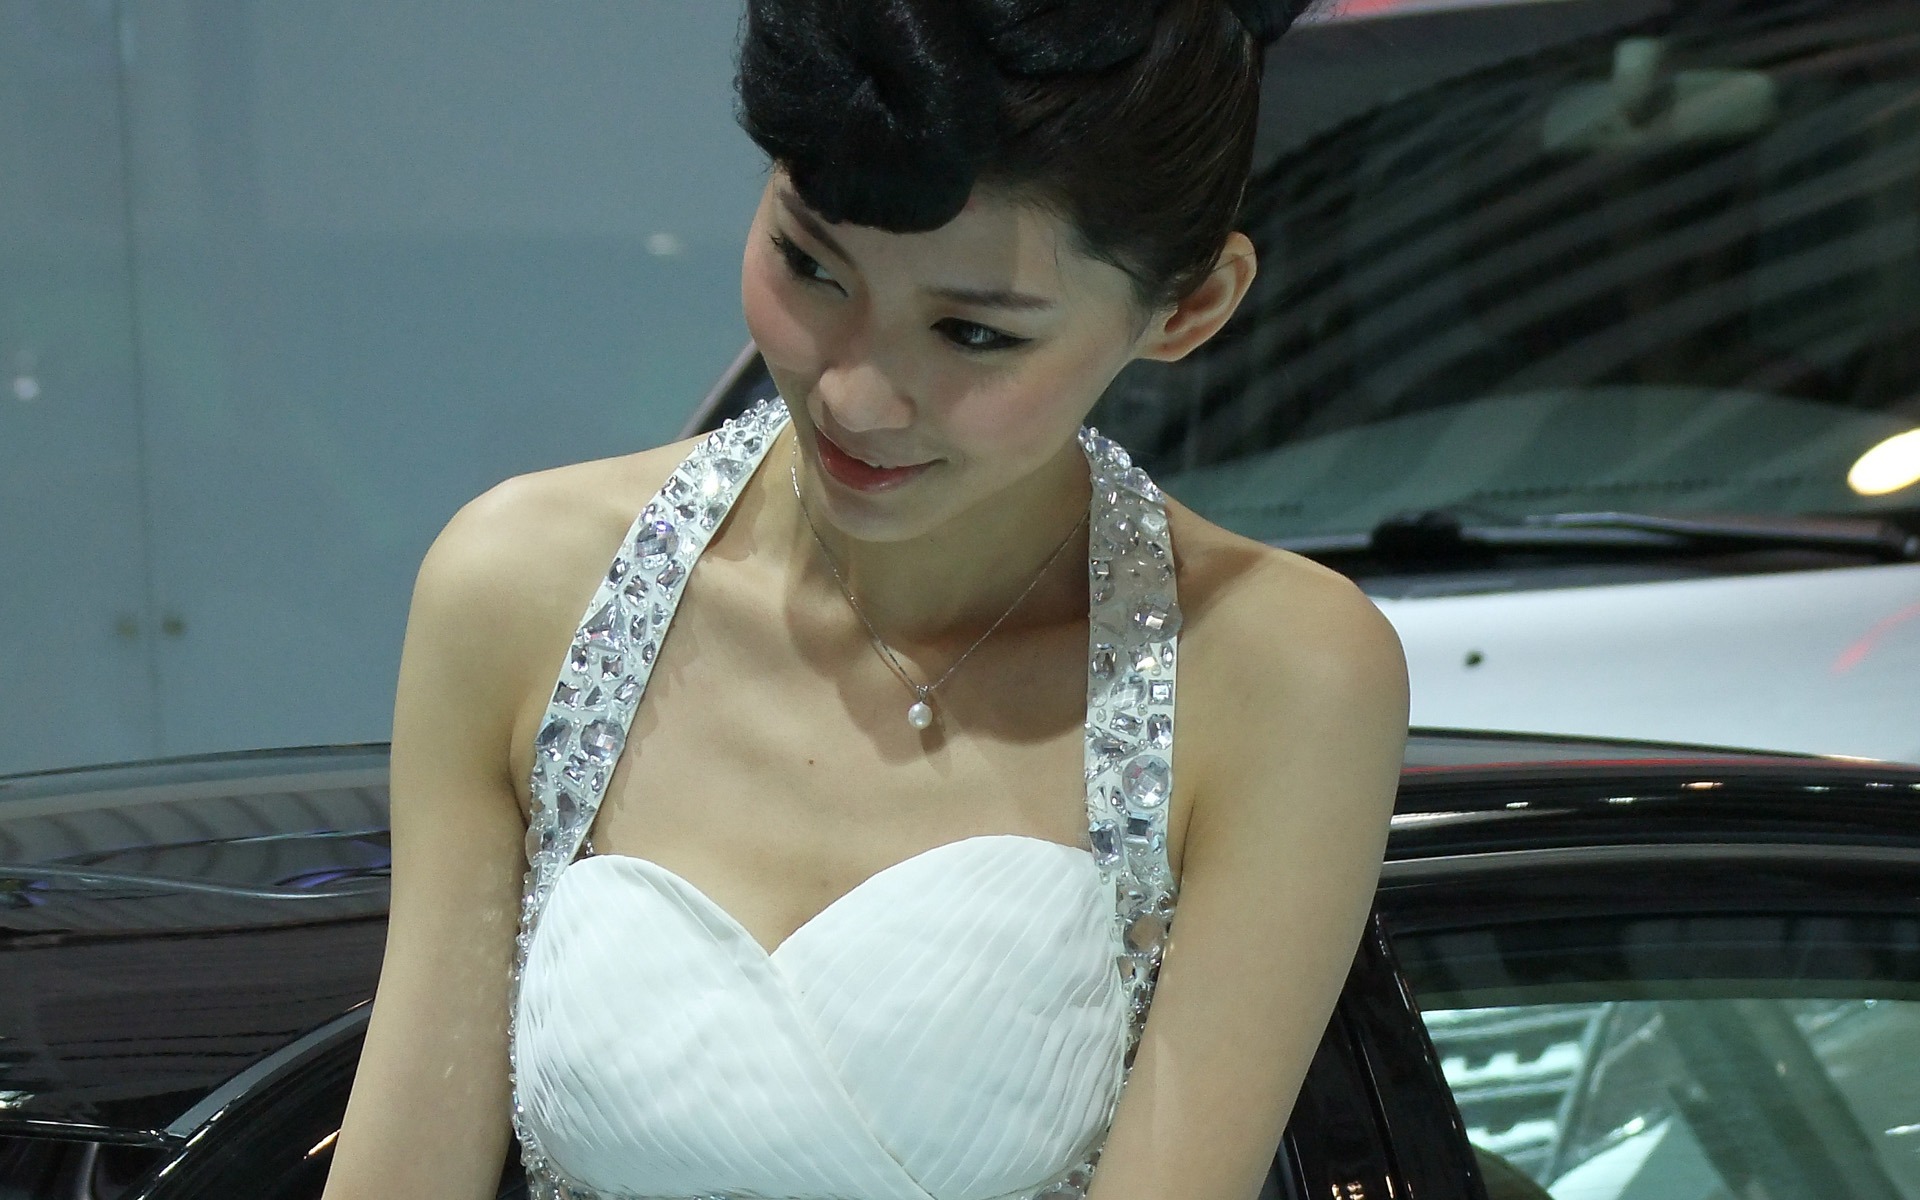 2010 Beijing Auto Show car models Collection (2) #1 - 1920x1200